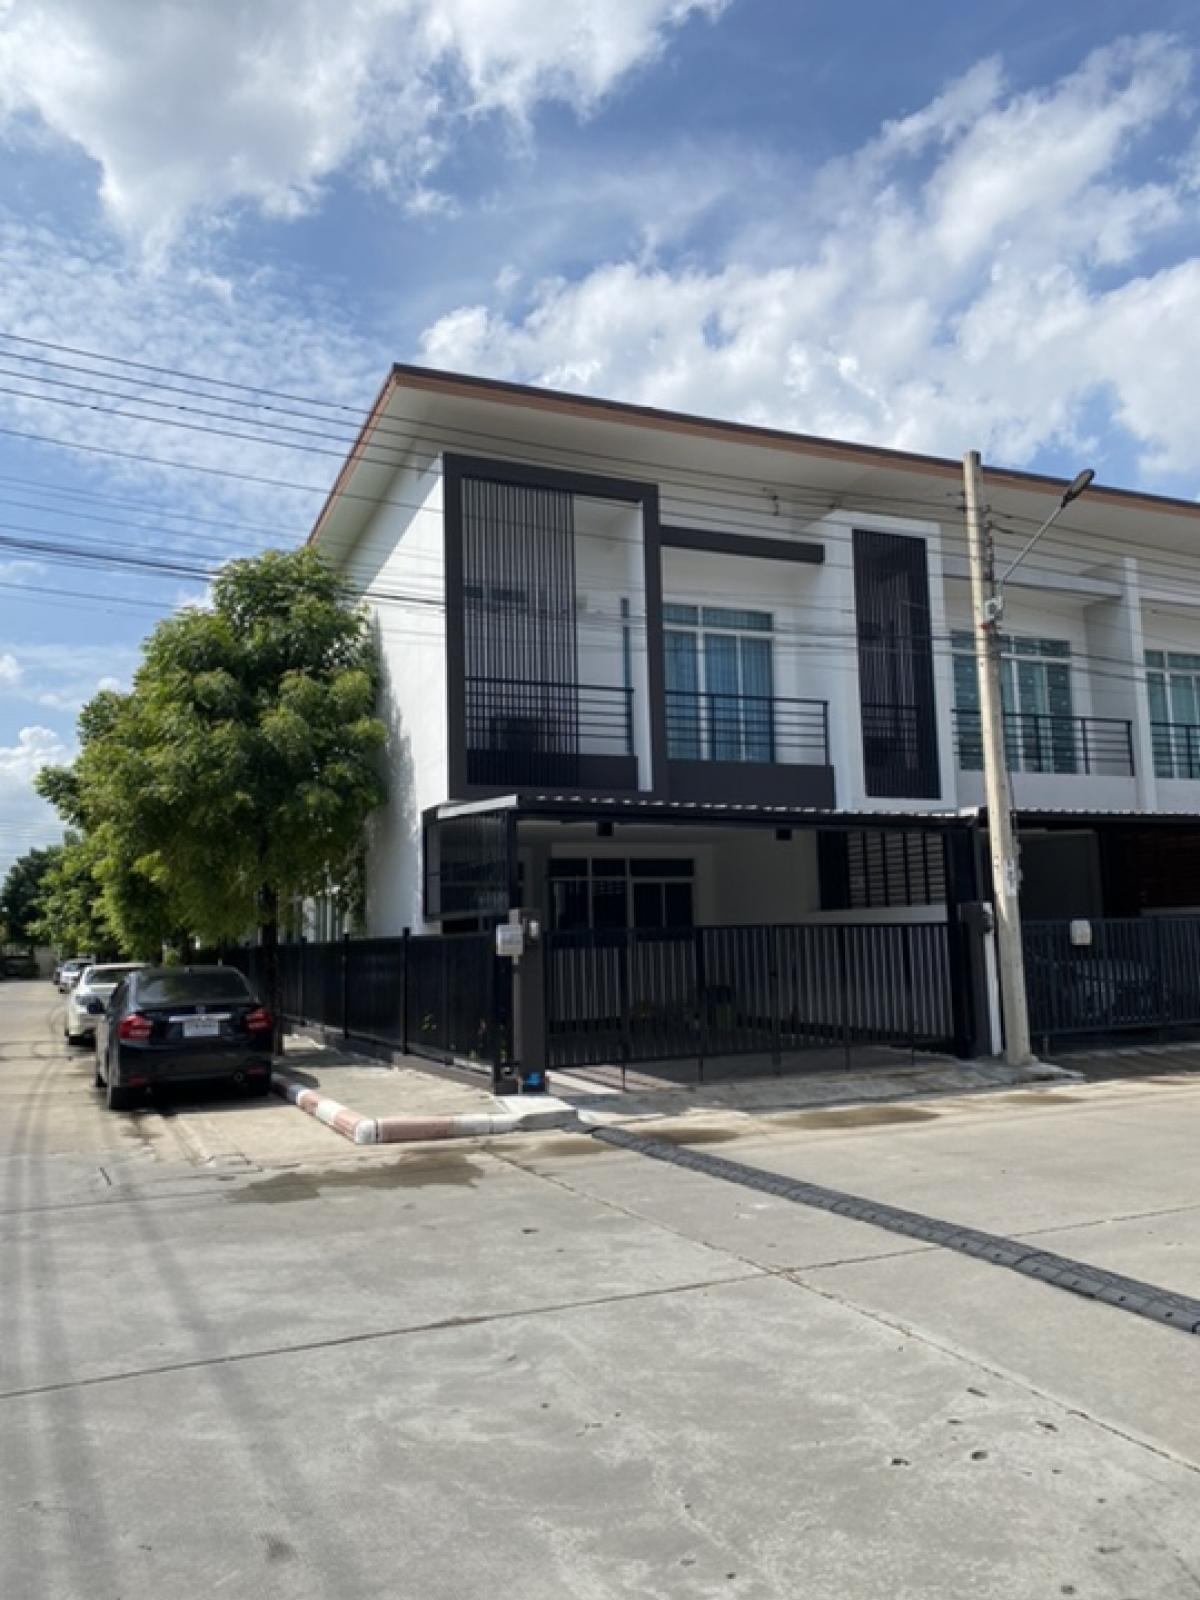 For RentTownhouseBang kae, Phetkasem : Home for Rent ! The miracle plus 2 , 2 floors3 bed 3 bathroom 4 carpark, full furniture ,30 minute to Satorn , foreigners welcome Tel 081-1011954